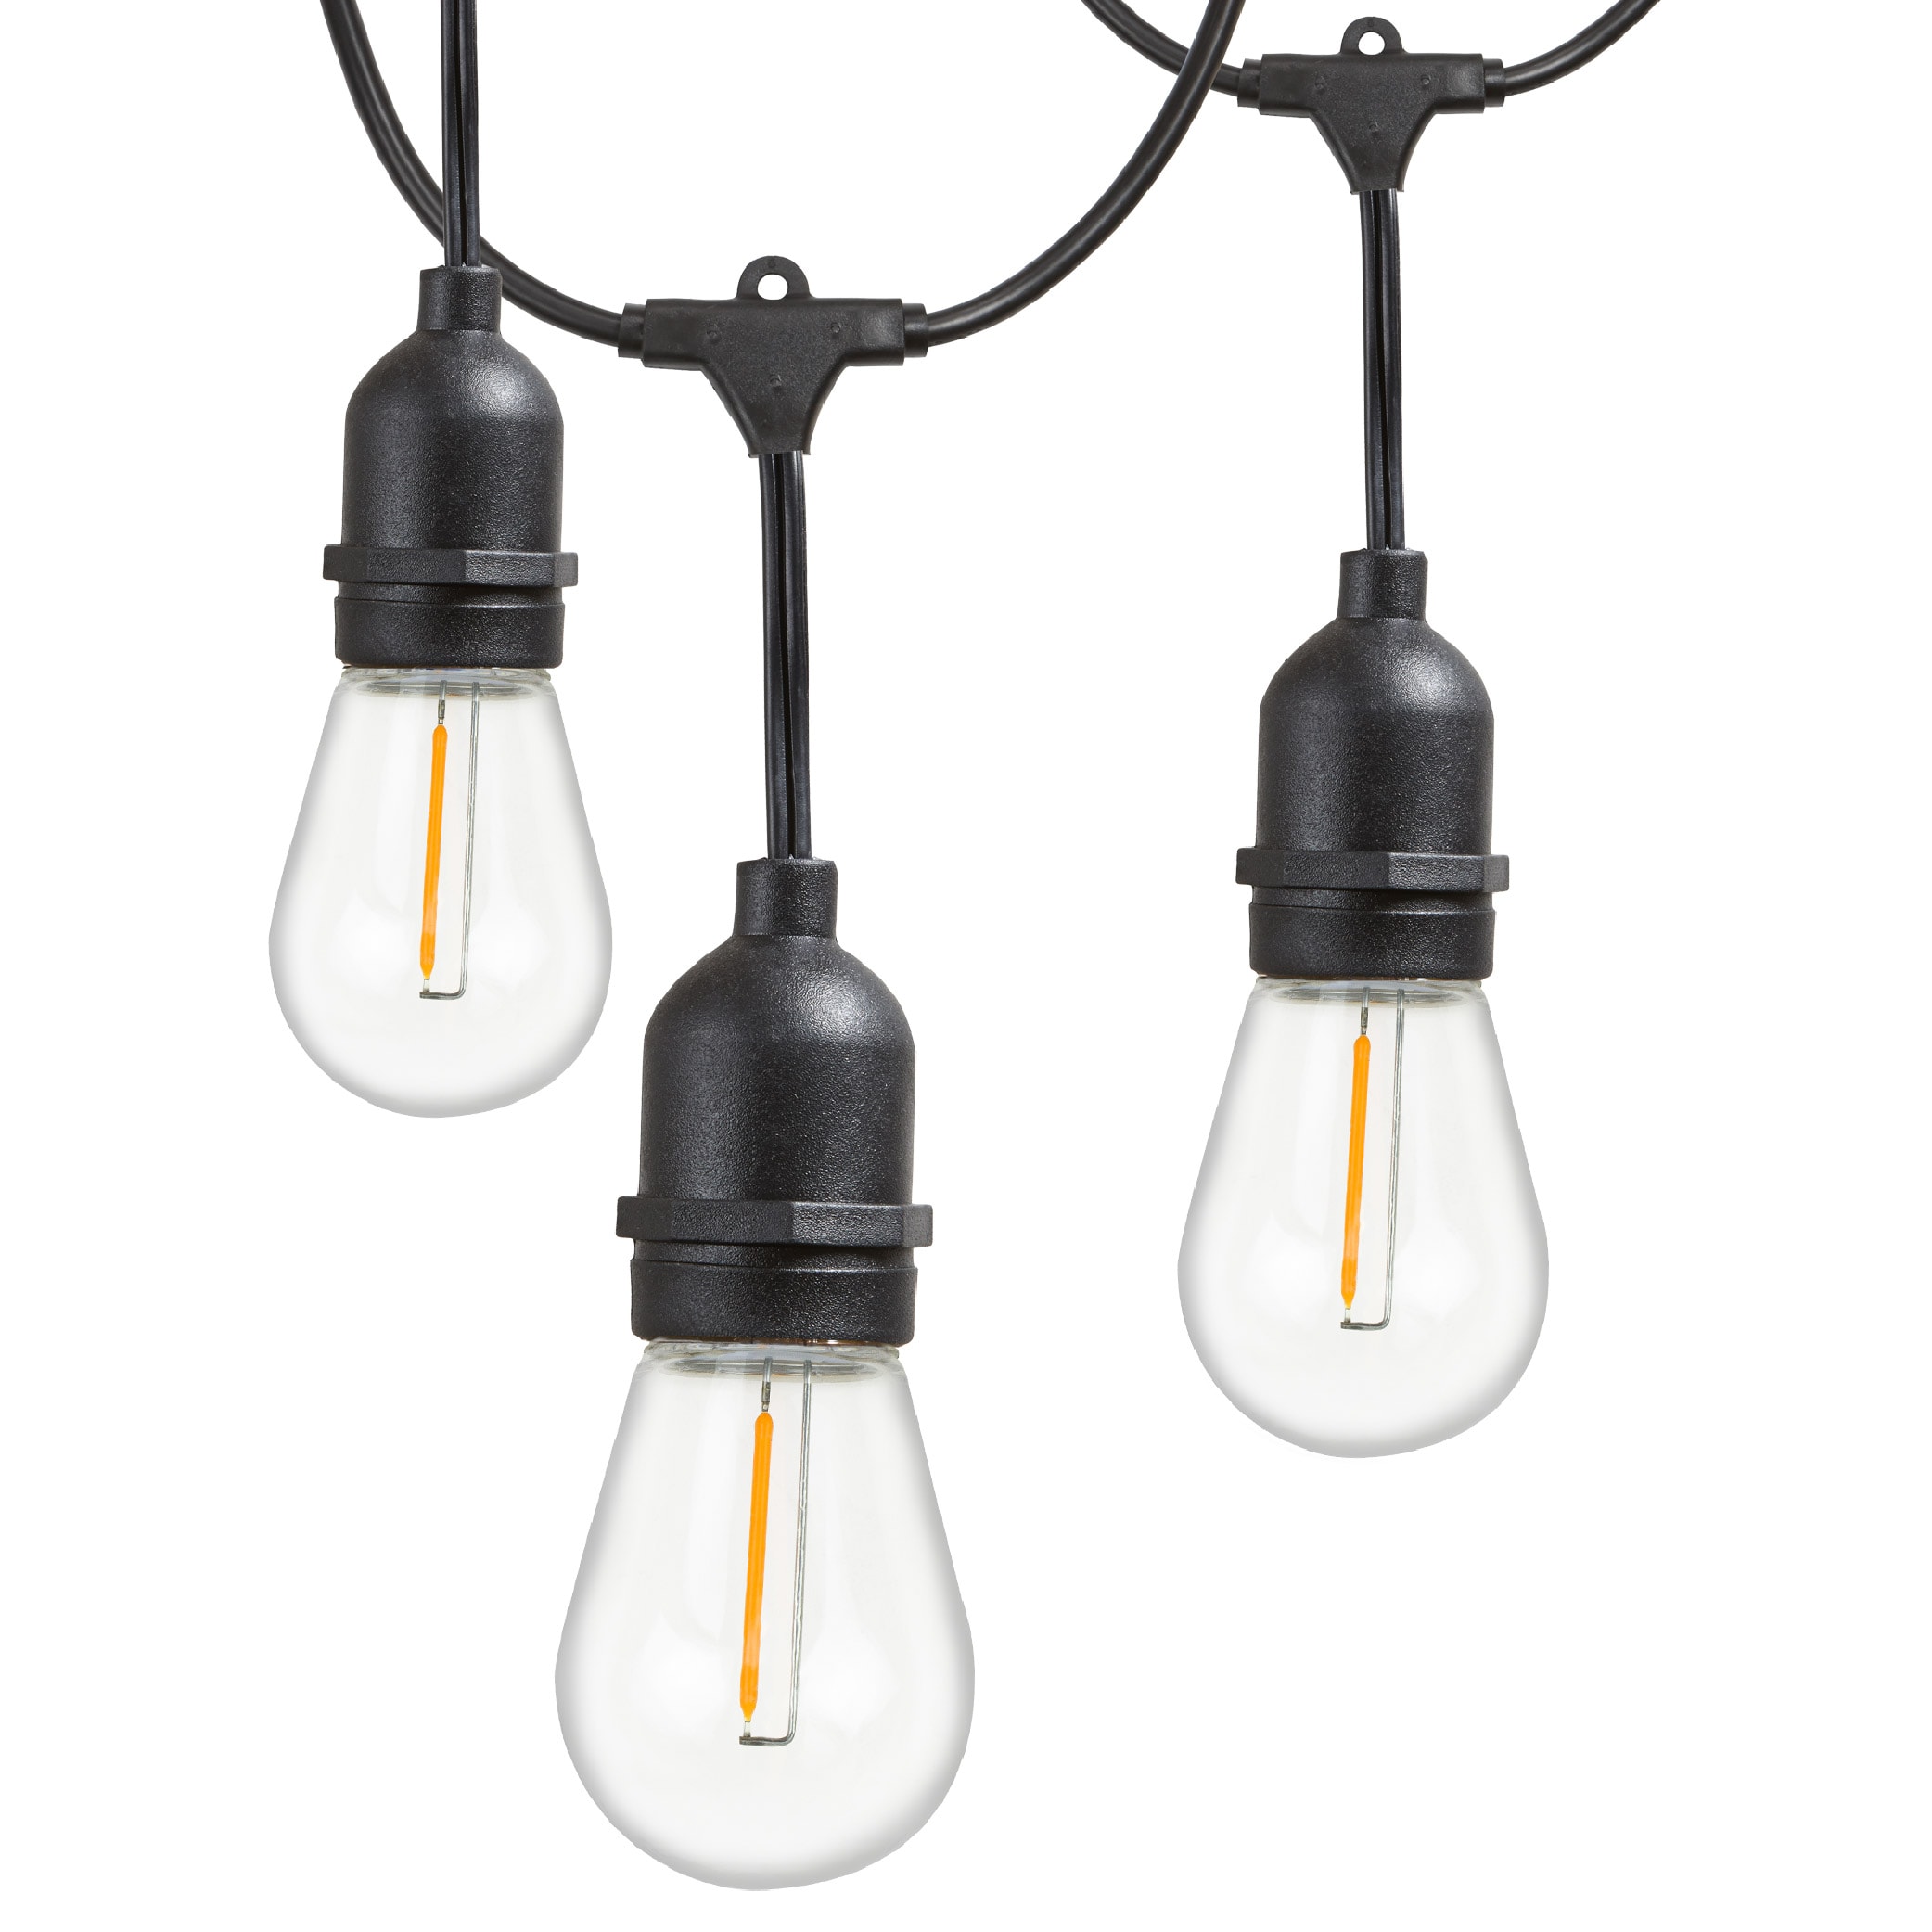 Newhouse Lighting 48-ft Plug-in Black Outdoor with 15 White-Light LED Edison Bulbs in the String Lights department at Lowes.com